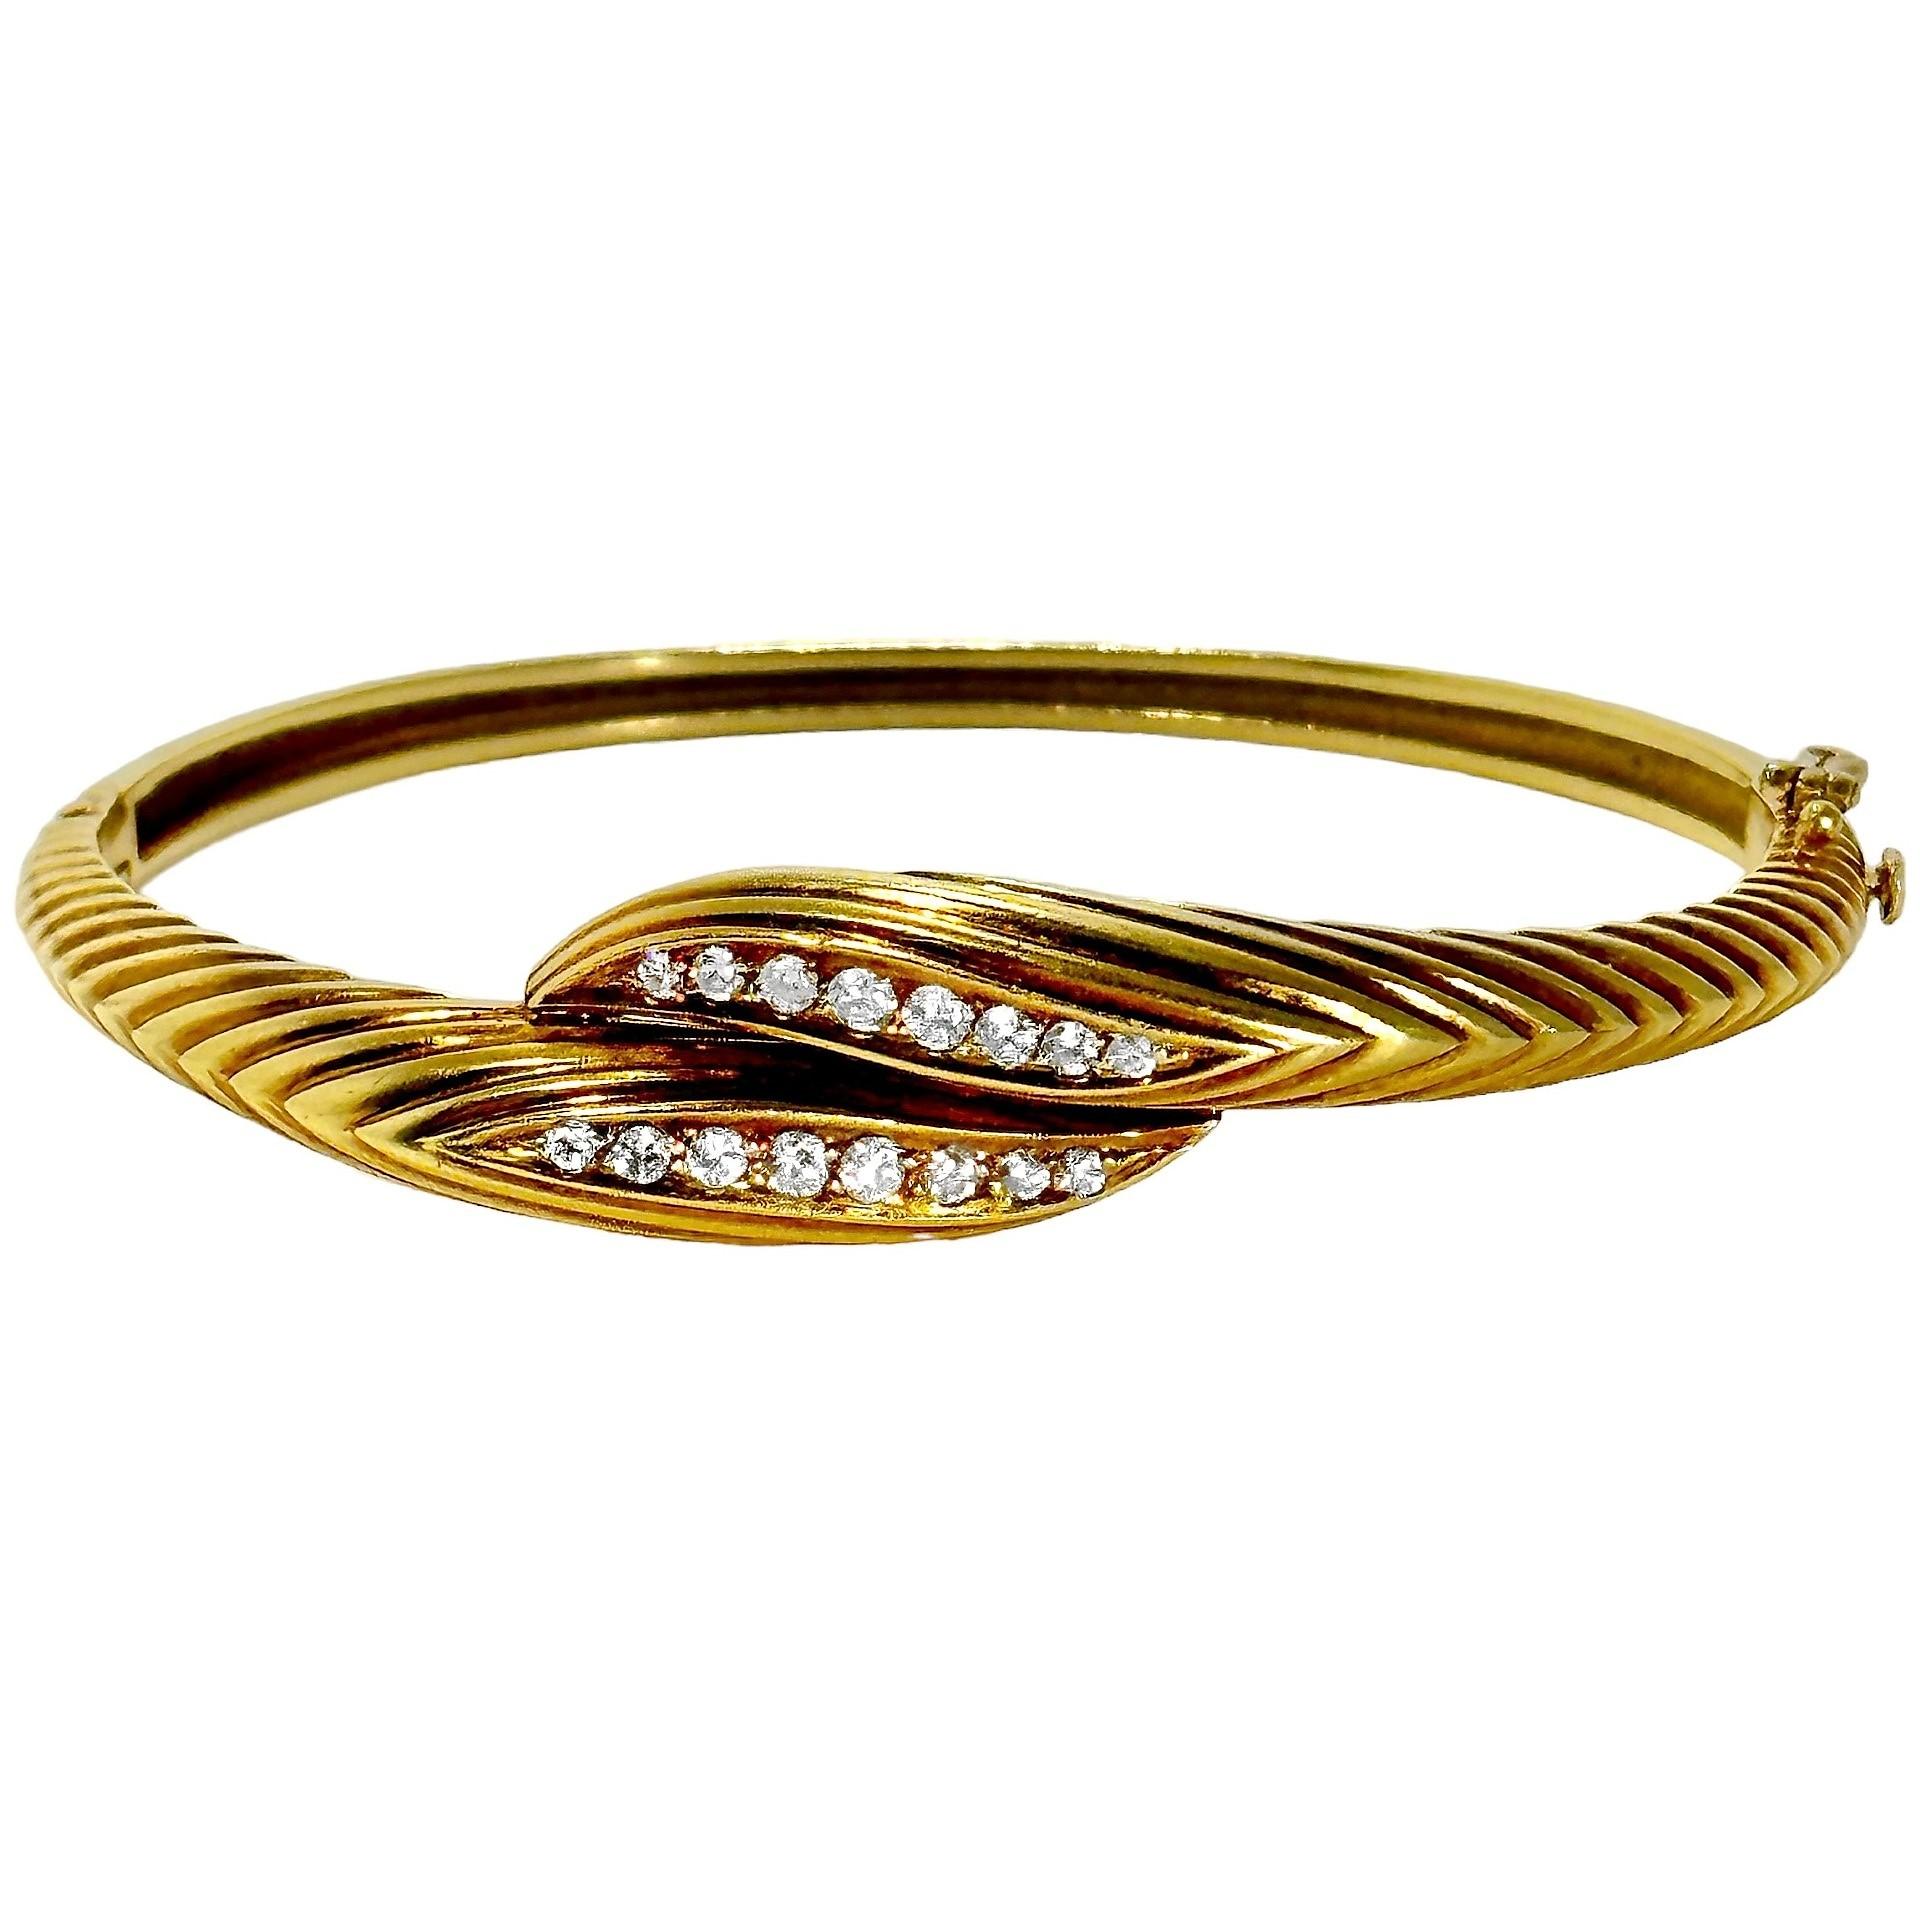 This lovely Mid-20th Century 18k yellow gold hinged bangle bracelet with diamonds exhibits true French Panache. It is deftly crafted with attention to details.
At the center, sixteen brilliant cut diamonds are set and have a total approximate weight